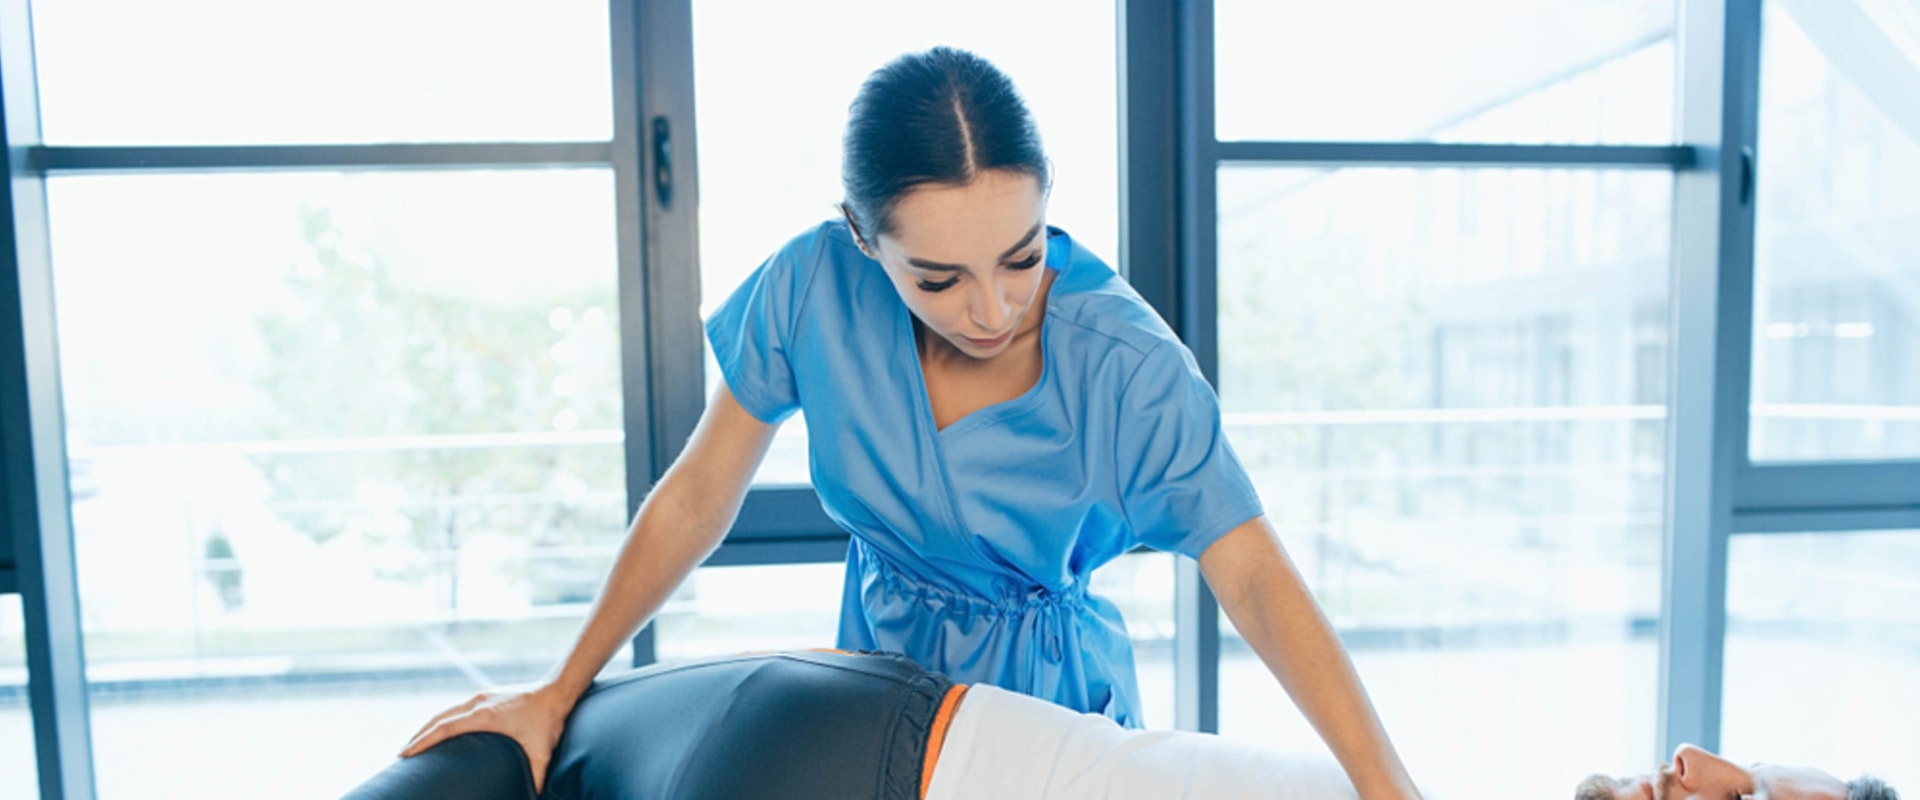 Preventive Health Care In NYC: How Physical Therapy Can Help You Stay Ahead Of The Game